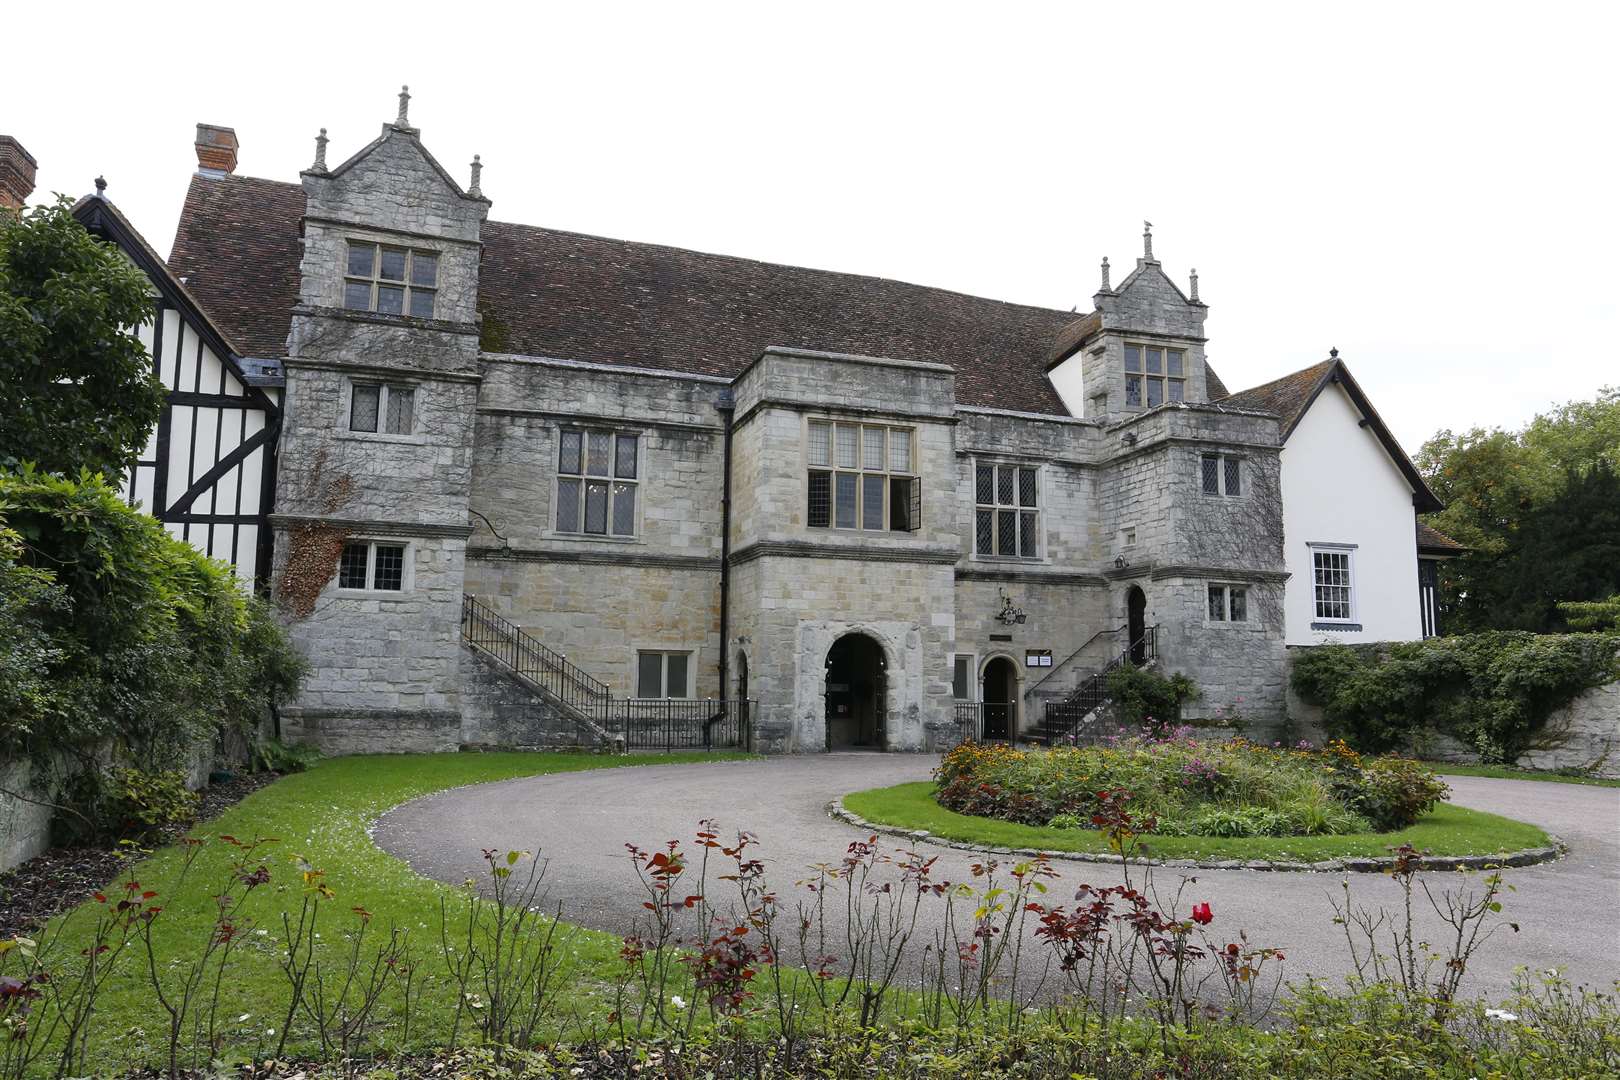 The inquest was held at the Archbishop's Palace in Maidstone